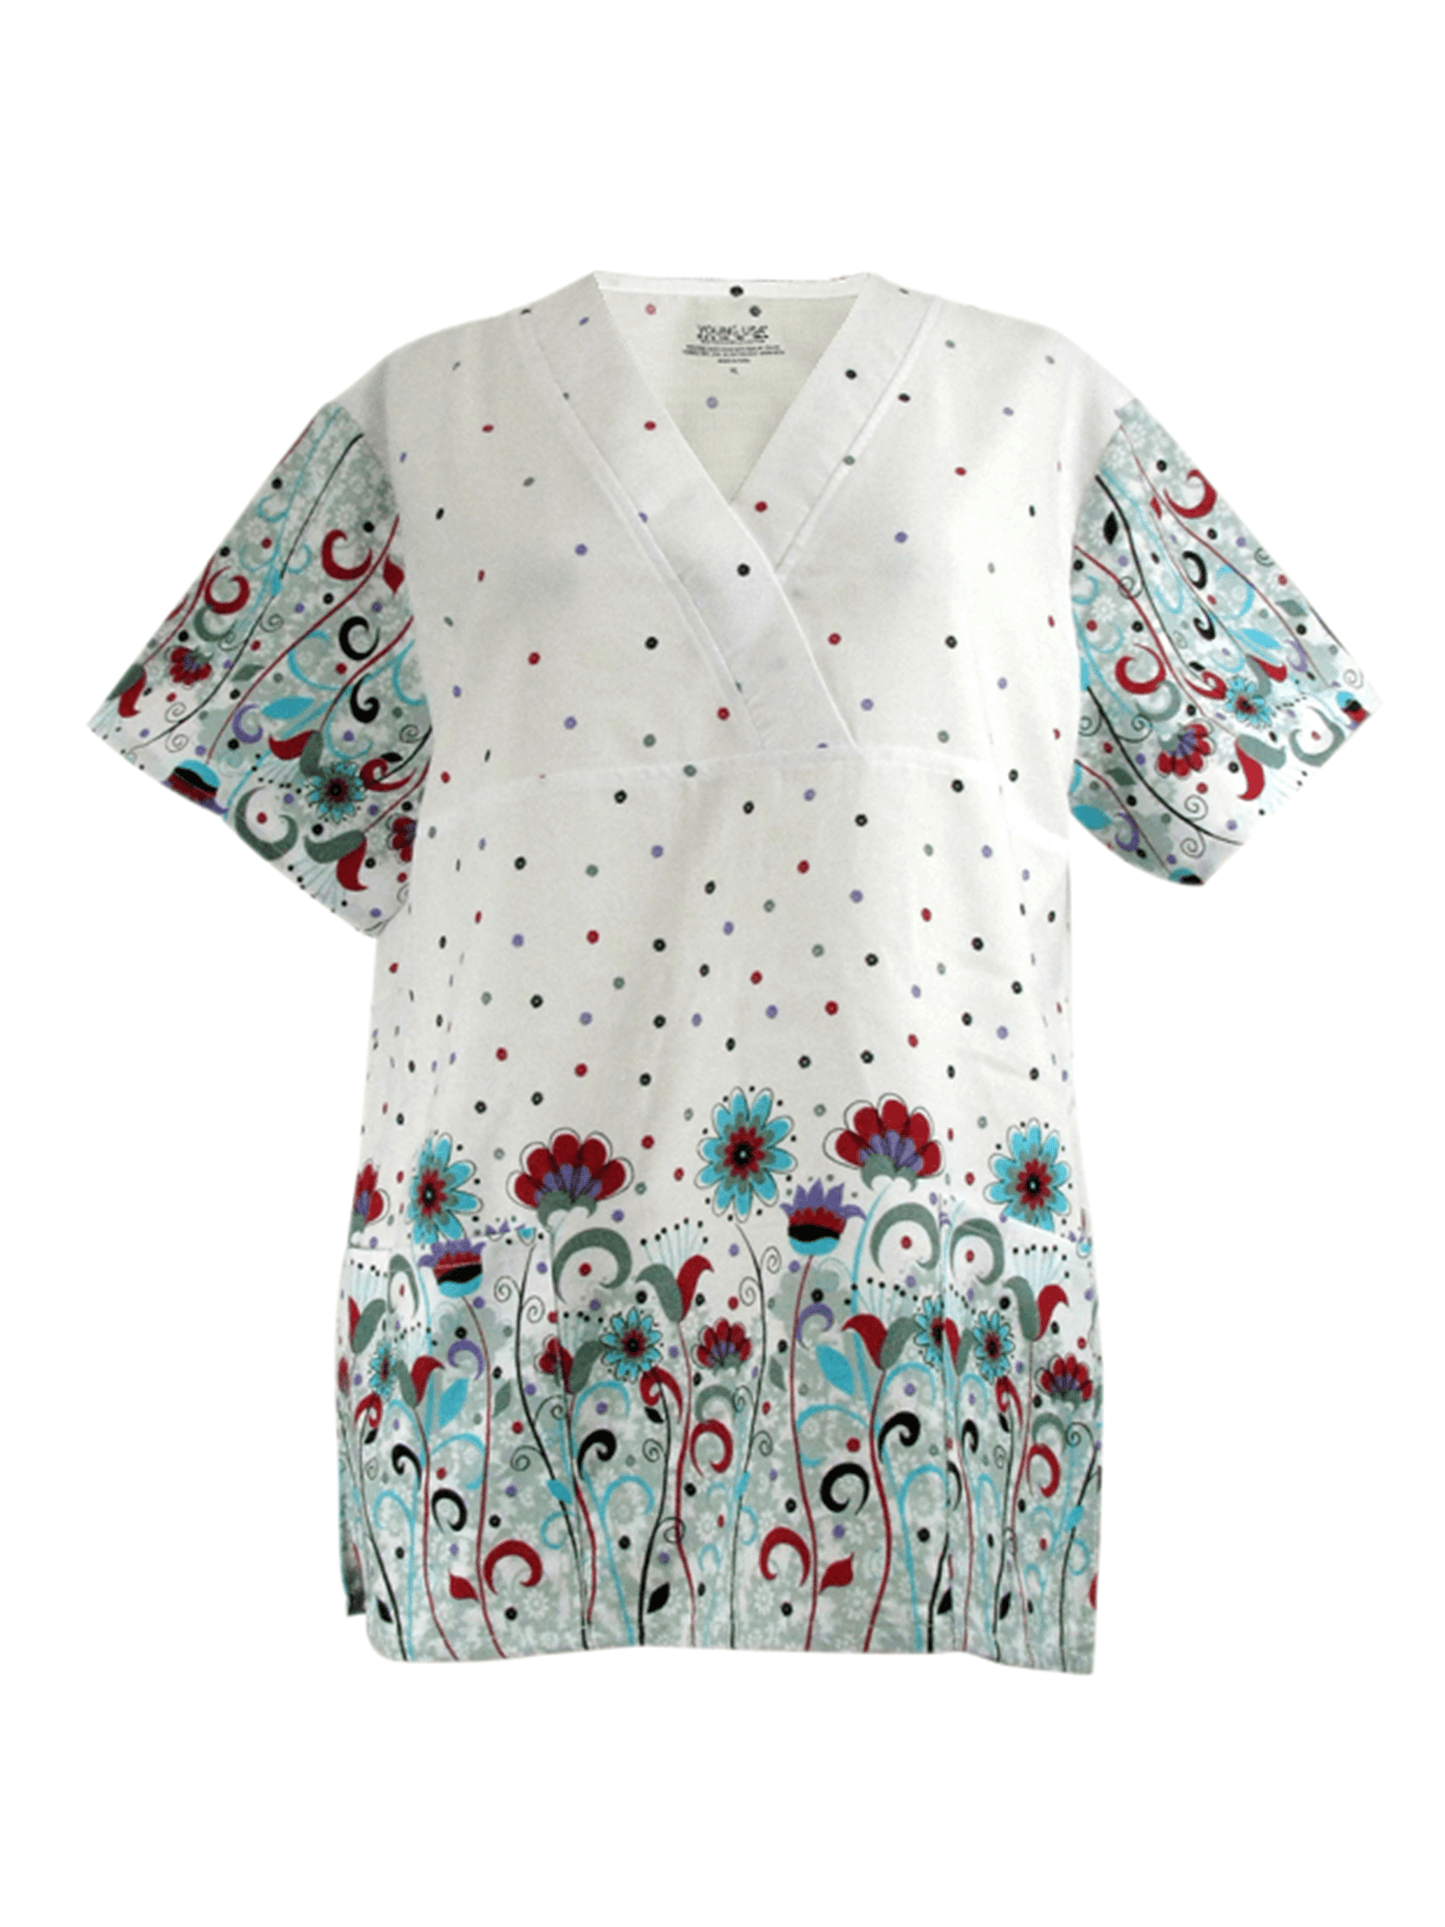 Young USA Ladies Scrub Top with White Flowers